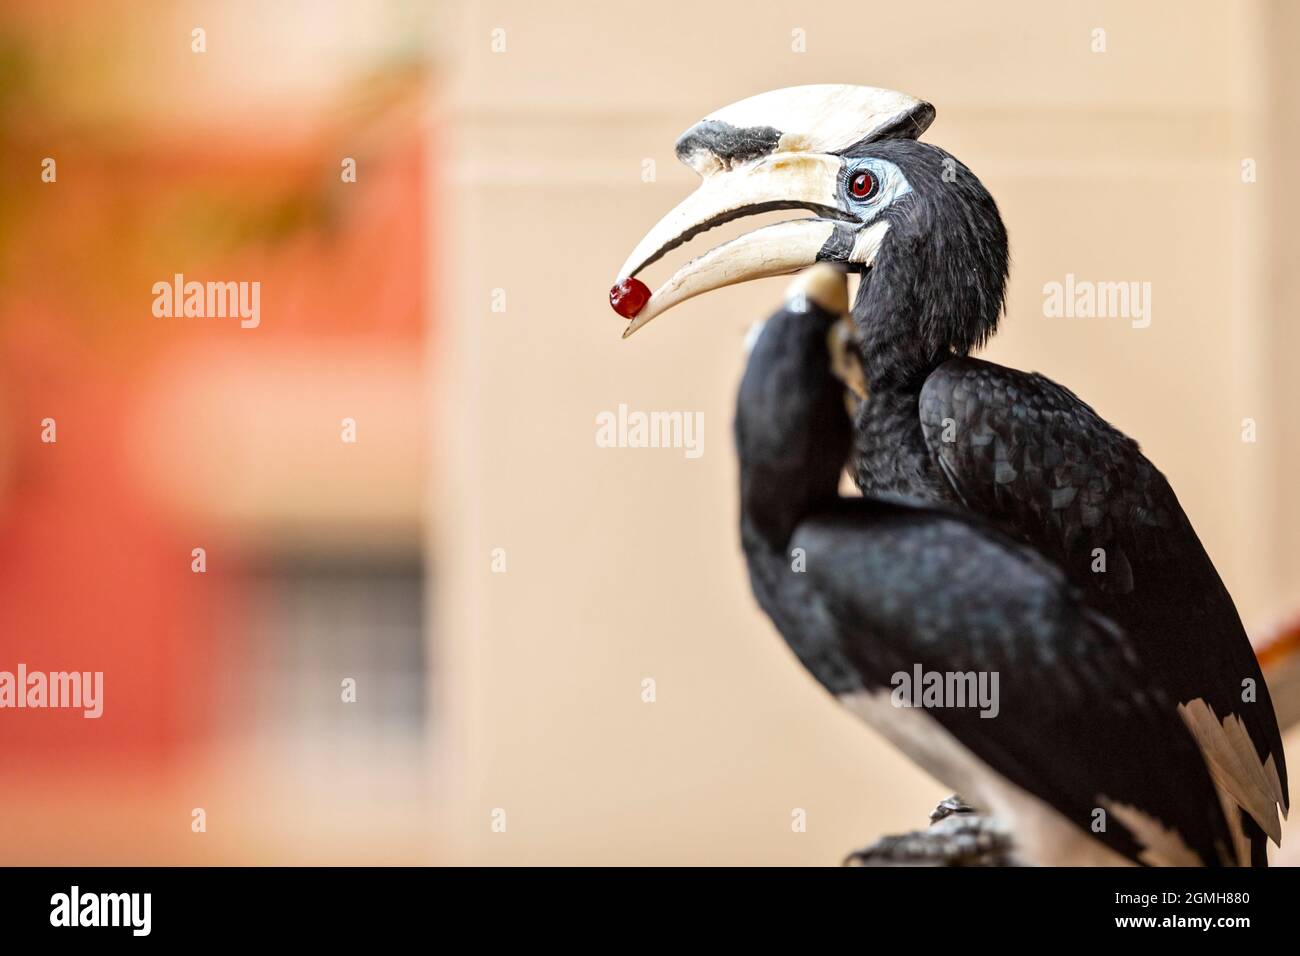 A pair of Oriental Pied Hornbill courtship feed with a grape on the balcony of a public housing estate, Singapore Stock Photo